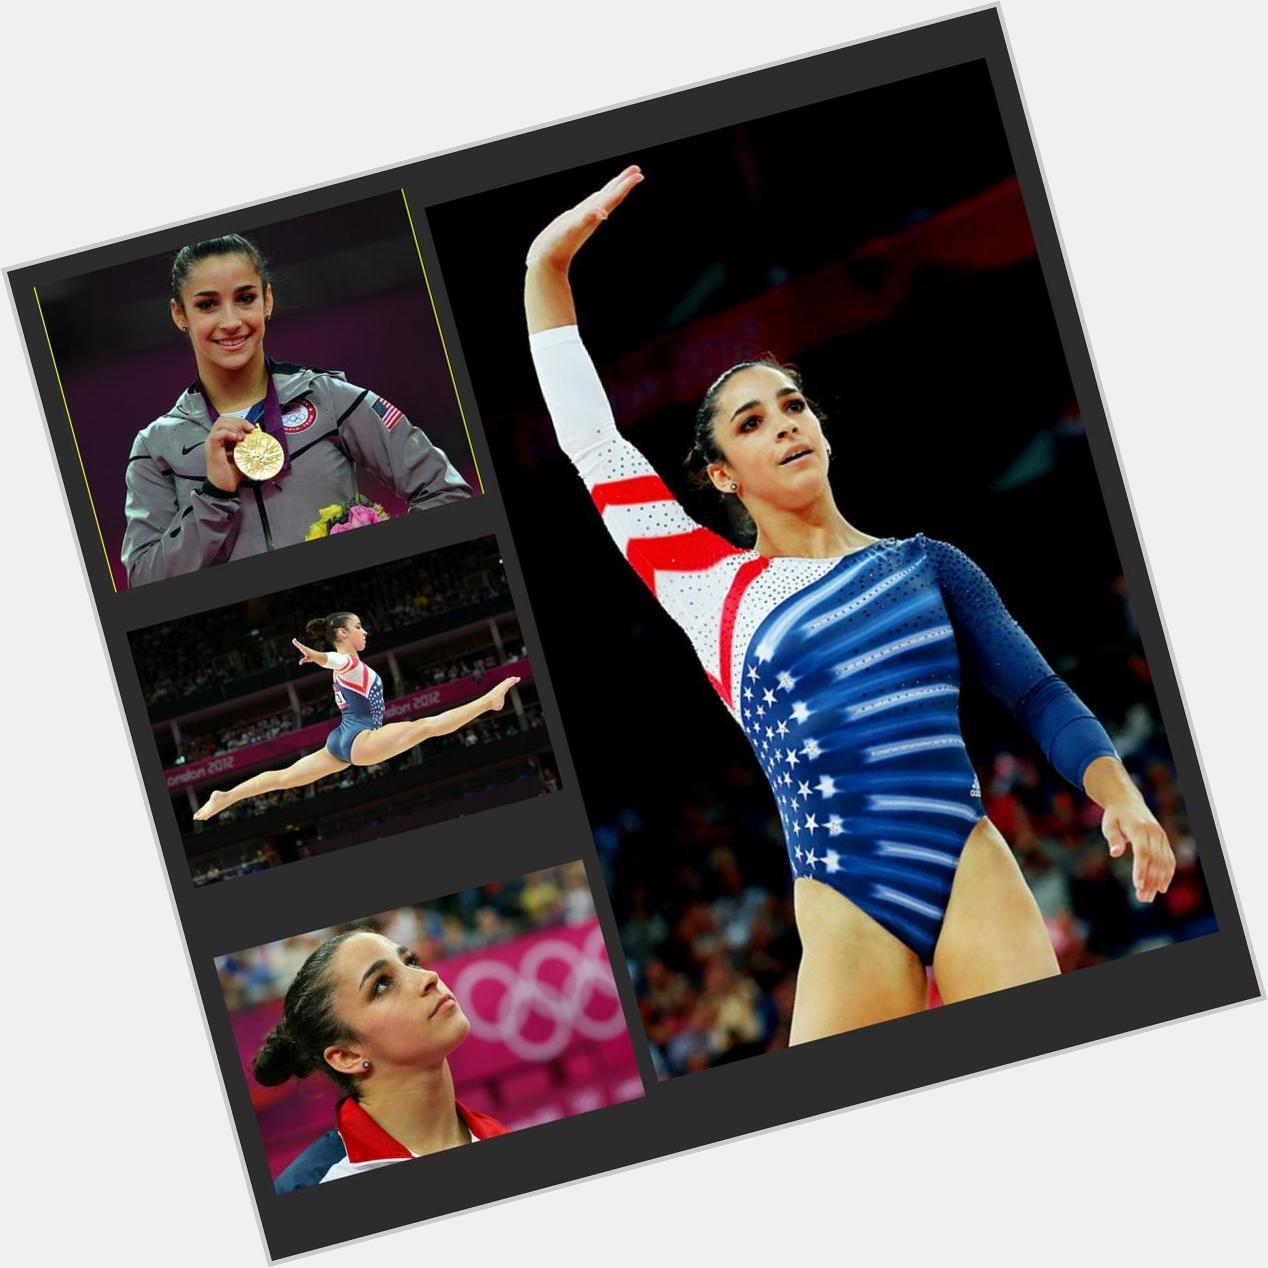 Happy Birthday to 1 of my fave gymnasts, An amazing athlete and she seems so cool. Def wanna meet her 